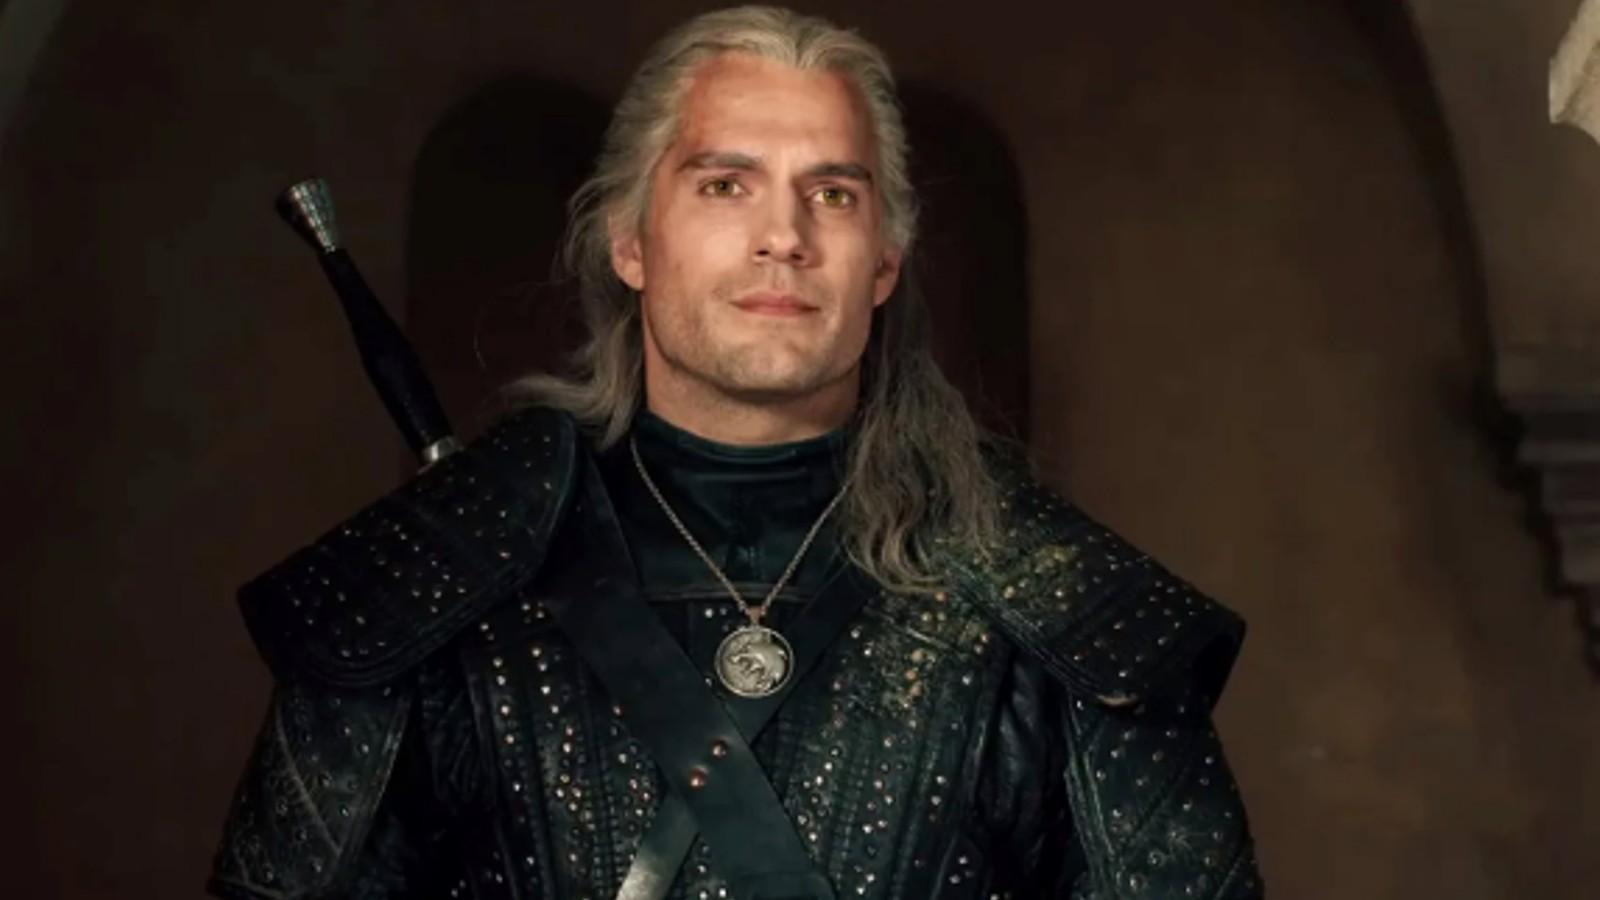 A close up of Henry Cavill in The Witcher as he wears armor